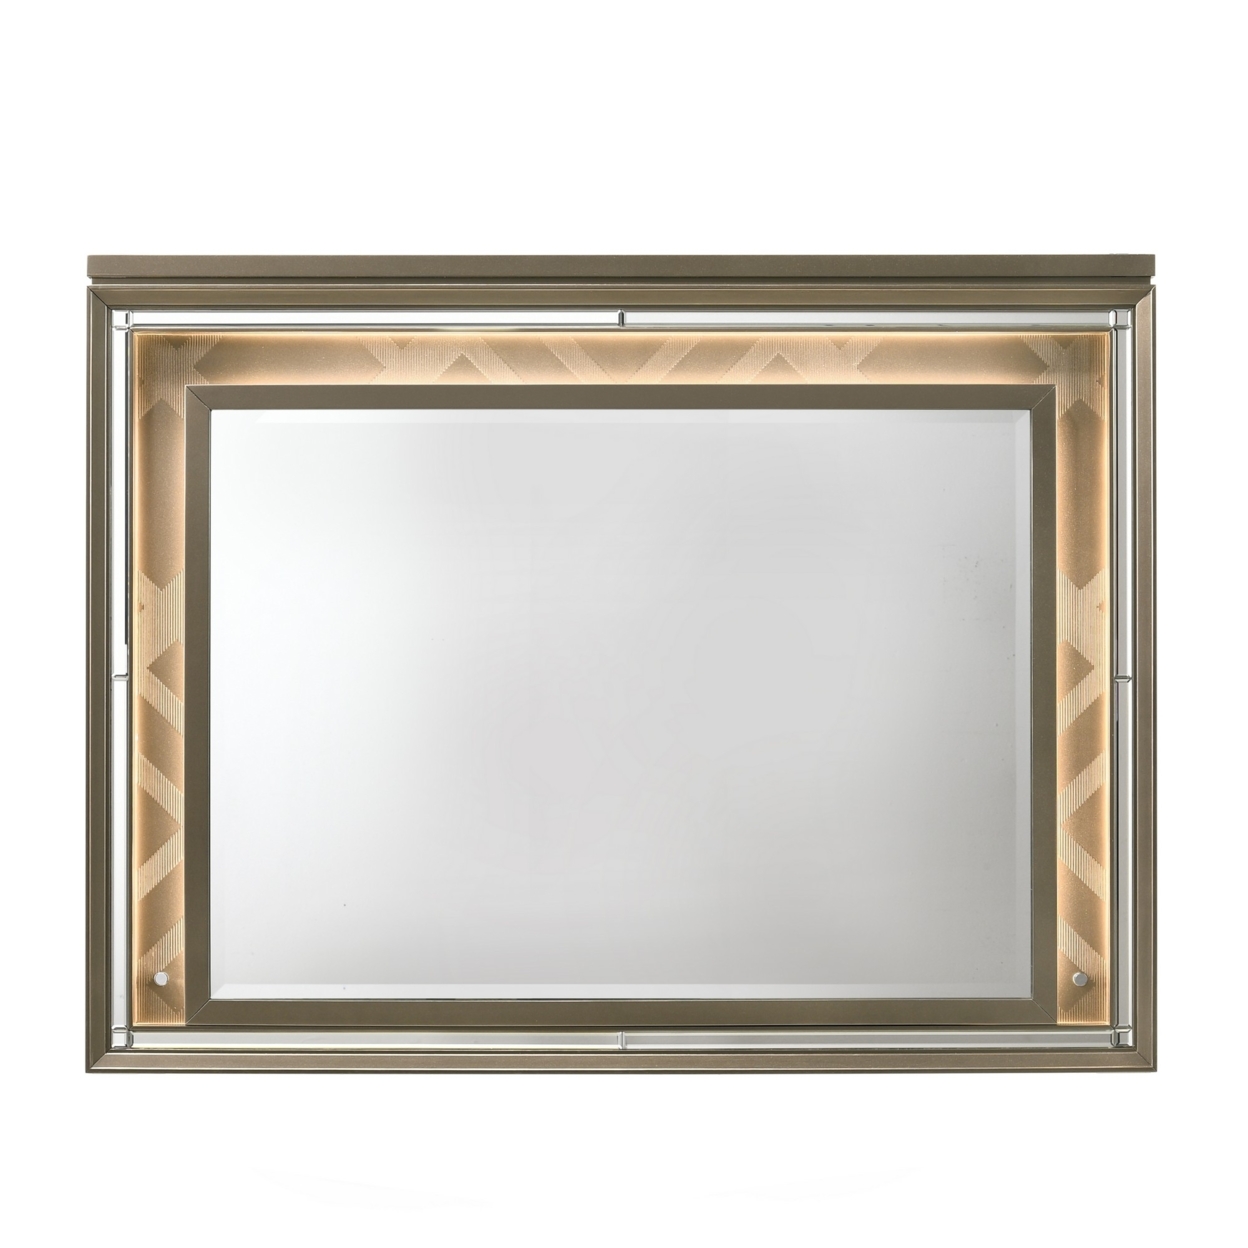 Contemporary Wall Mirror With LED And Accent Details, Gold And Brown- Saltoro Sherpi